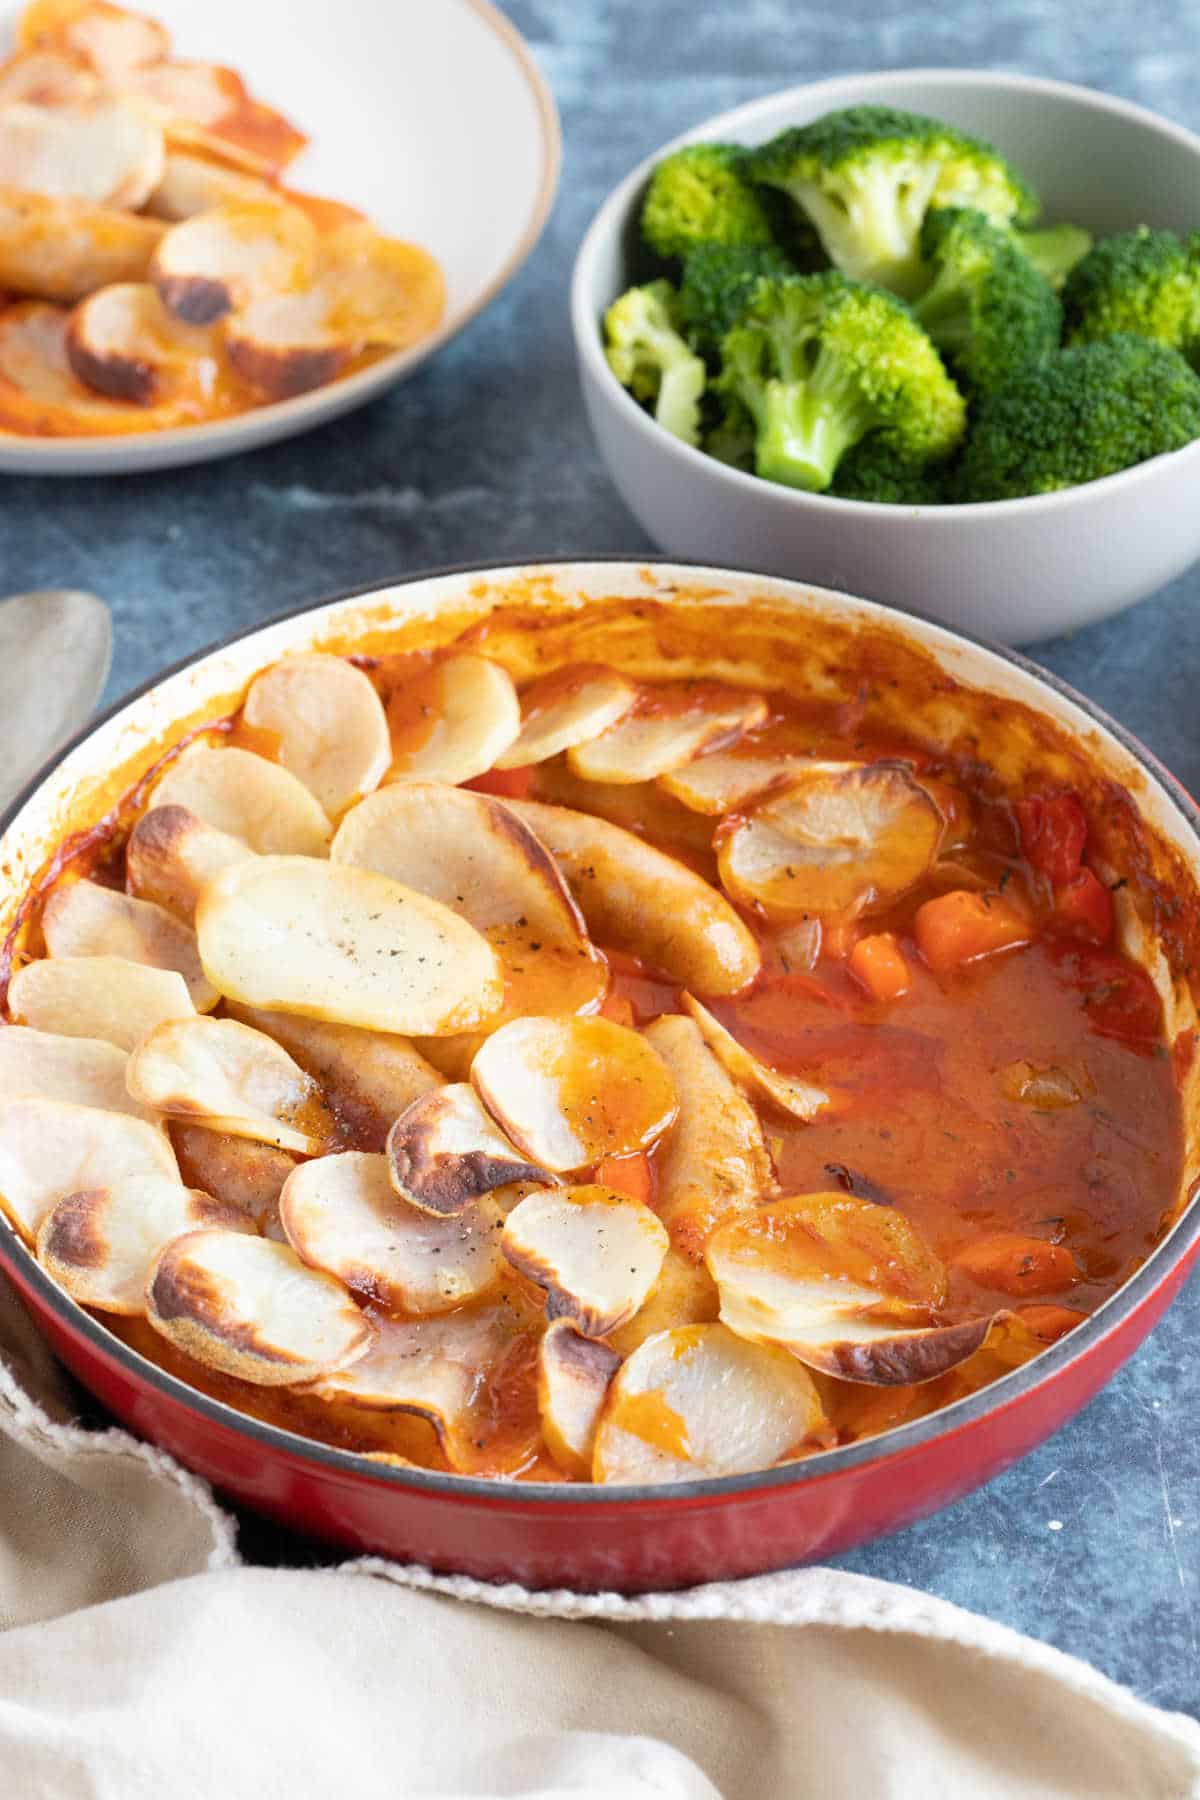 Sausage hotpot in a red pan with a side of broccoli.